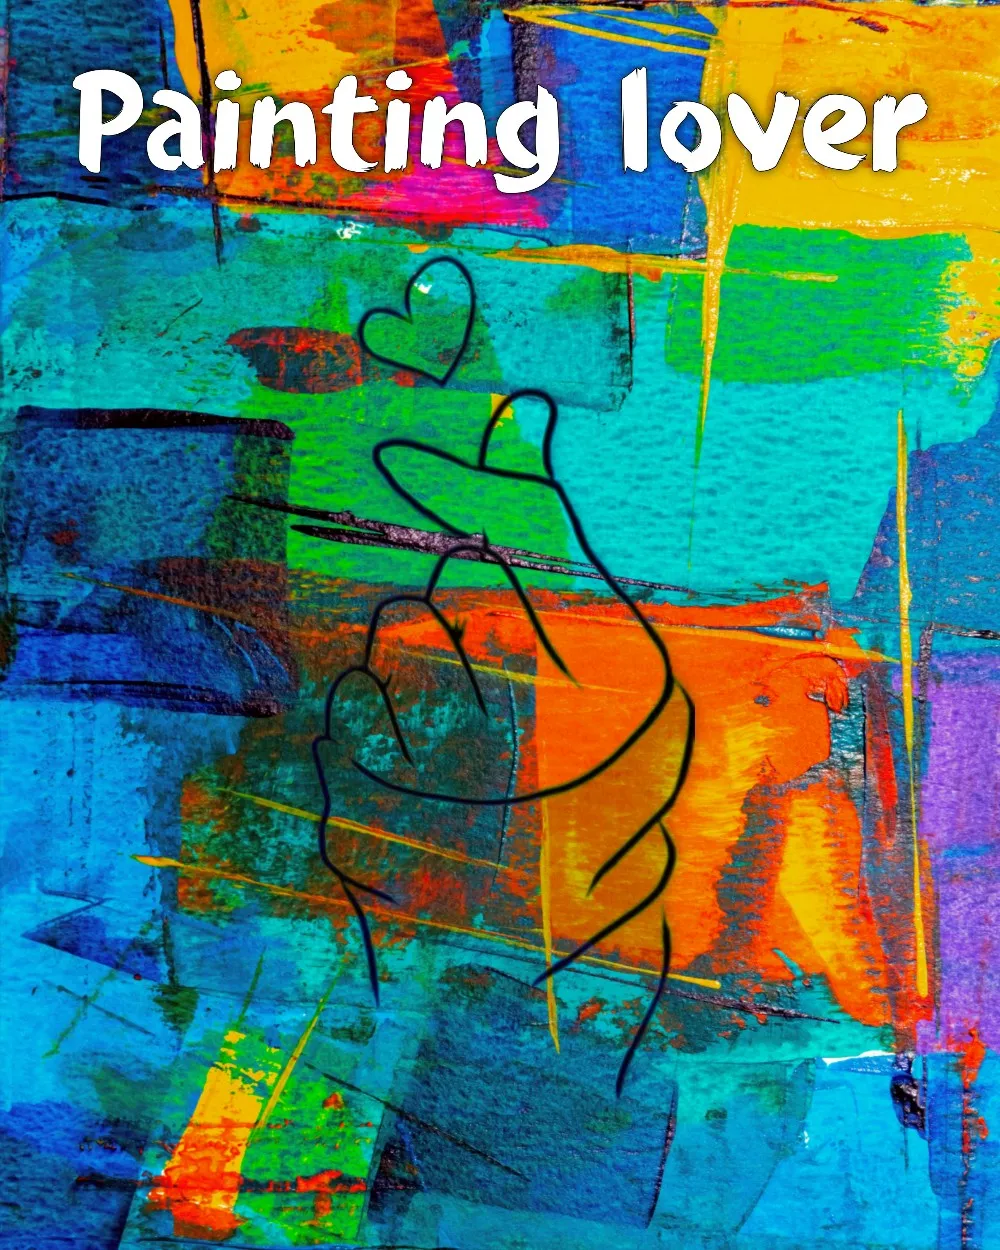 Painting lover wall background for photo editing download in high quality  #FREE - KRC PICTURES